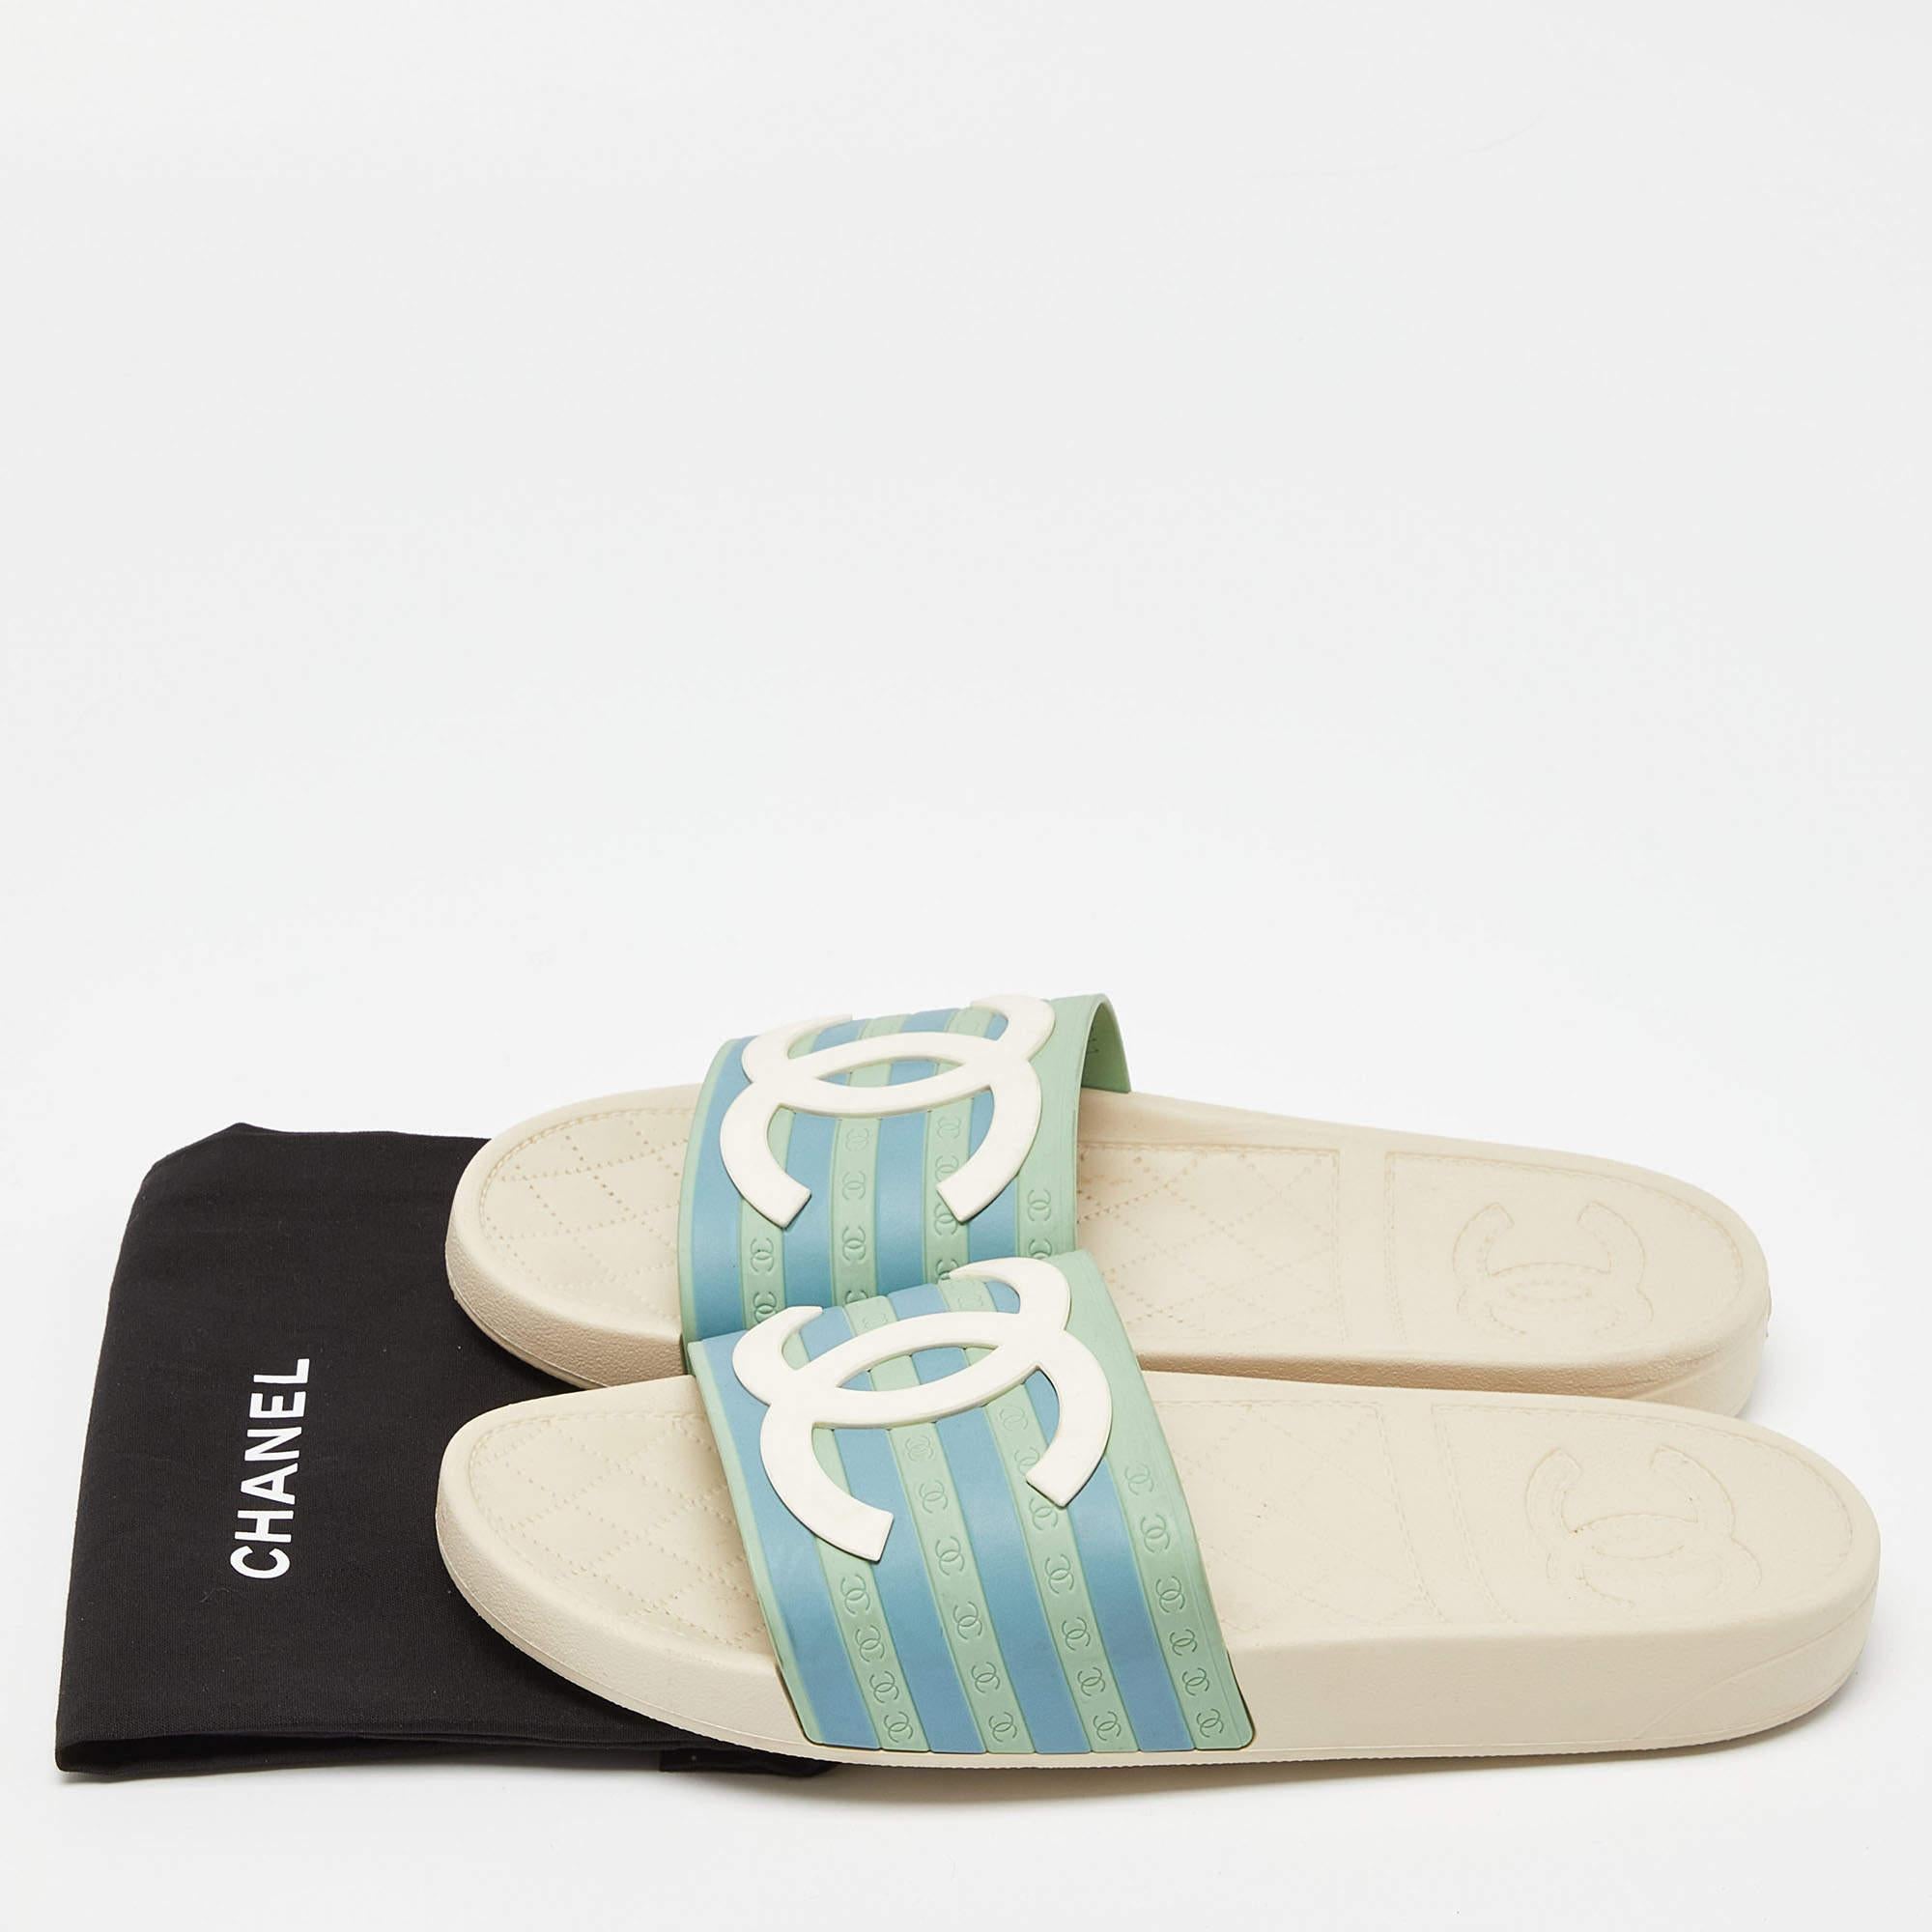 Perfectly blending comfort and style, these multicolor slide sandals from Chanel are a must-have! They are crafted from rubber in an open-toe silhouette and styled with stripes as well as the CC logo on the vamps.

